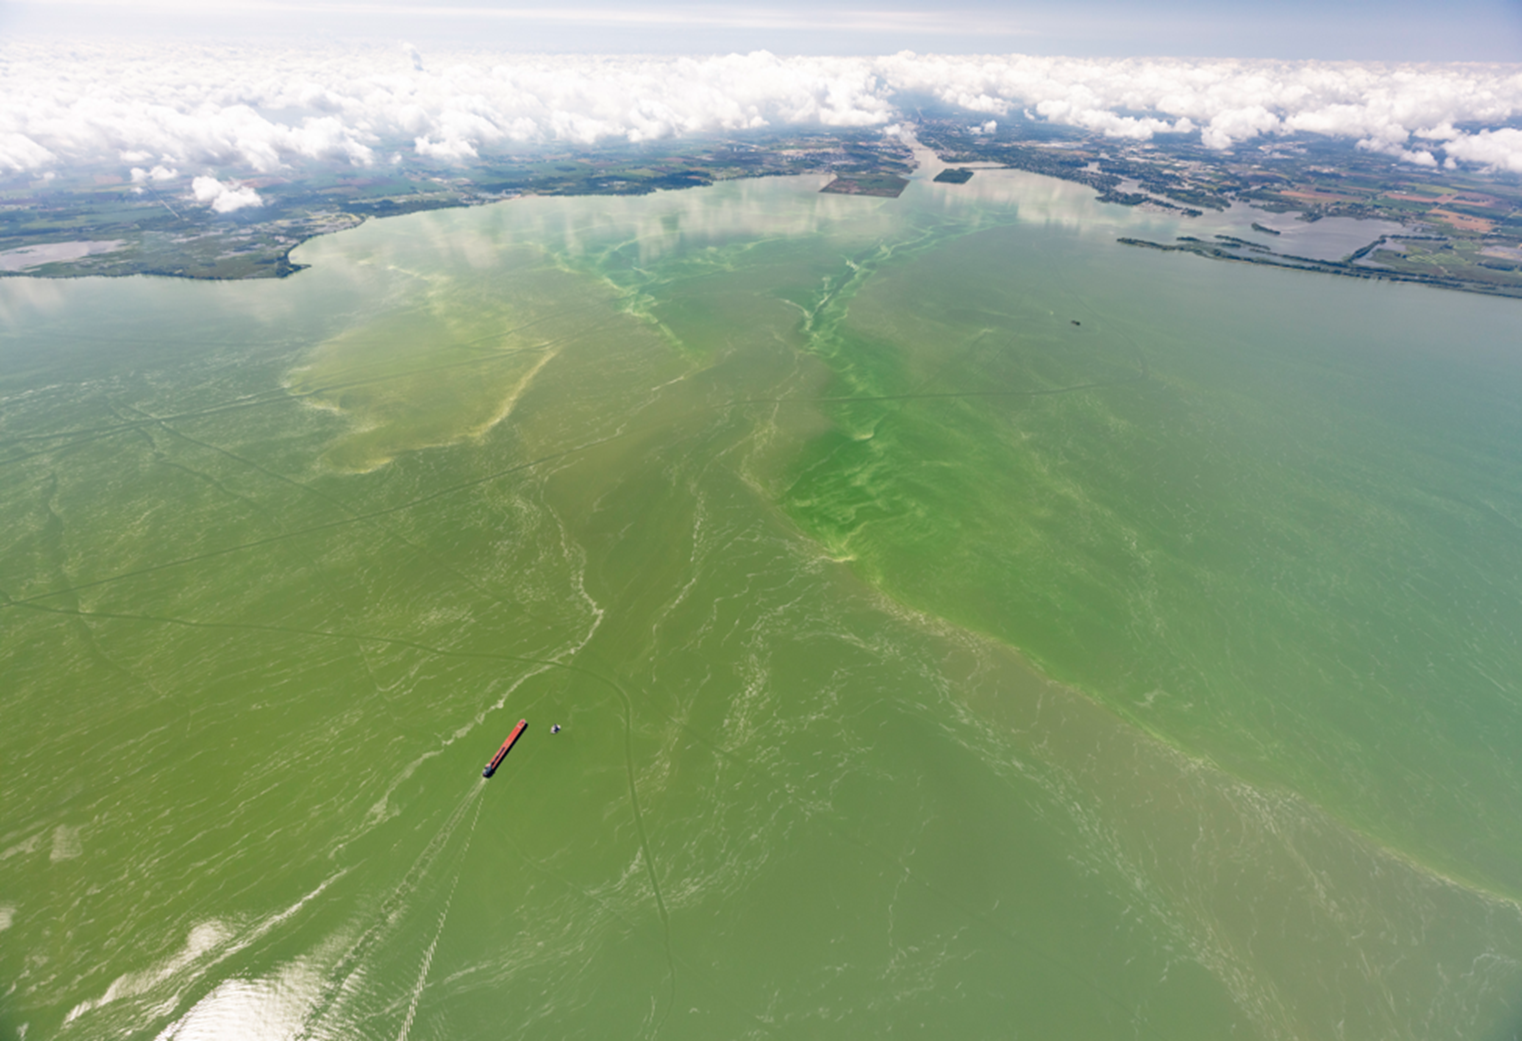 <p>The photo below shows the mouth of the Maumee River from above Lake Erie. For spatial perspective, the red object is a freighter moving toward the mouth. The nutrient-laden river waters have caused the massive algal bloom in the lake. As dead algal cells sink to the lake bottom, respiration by decomposer bacteria draw dissolved oxygen concentrations down to very low levels. These conditions favor _________________ selection toward increasingly ____________ cell size in bacteria populations as dissolved oxygen concentrations decline. a. stabilizing, fluctuating b. directional, smaller c. directional, larger</p>